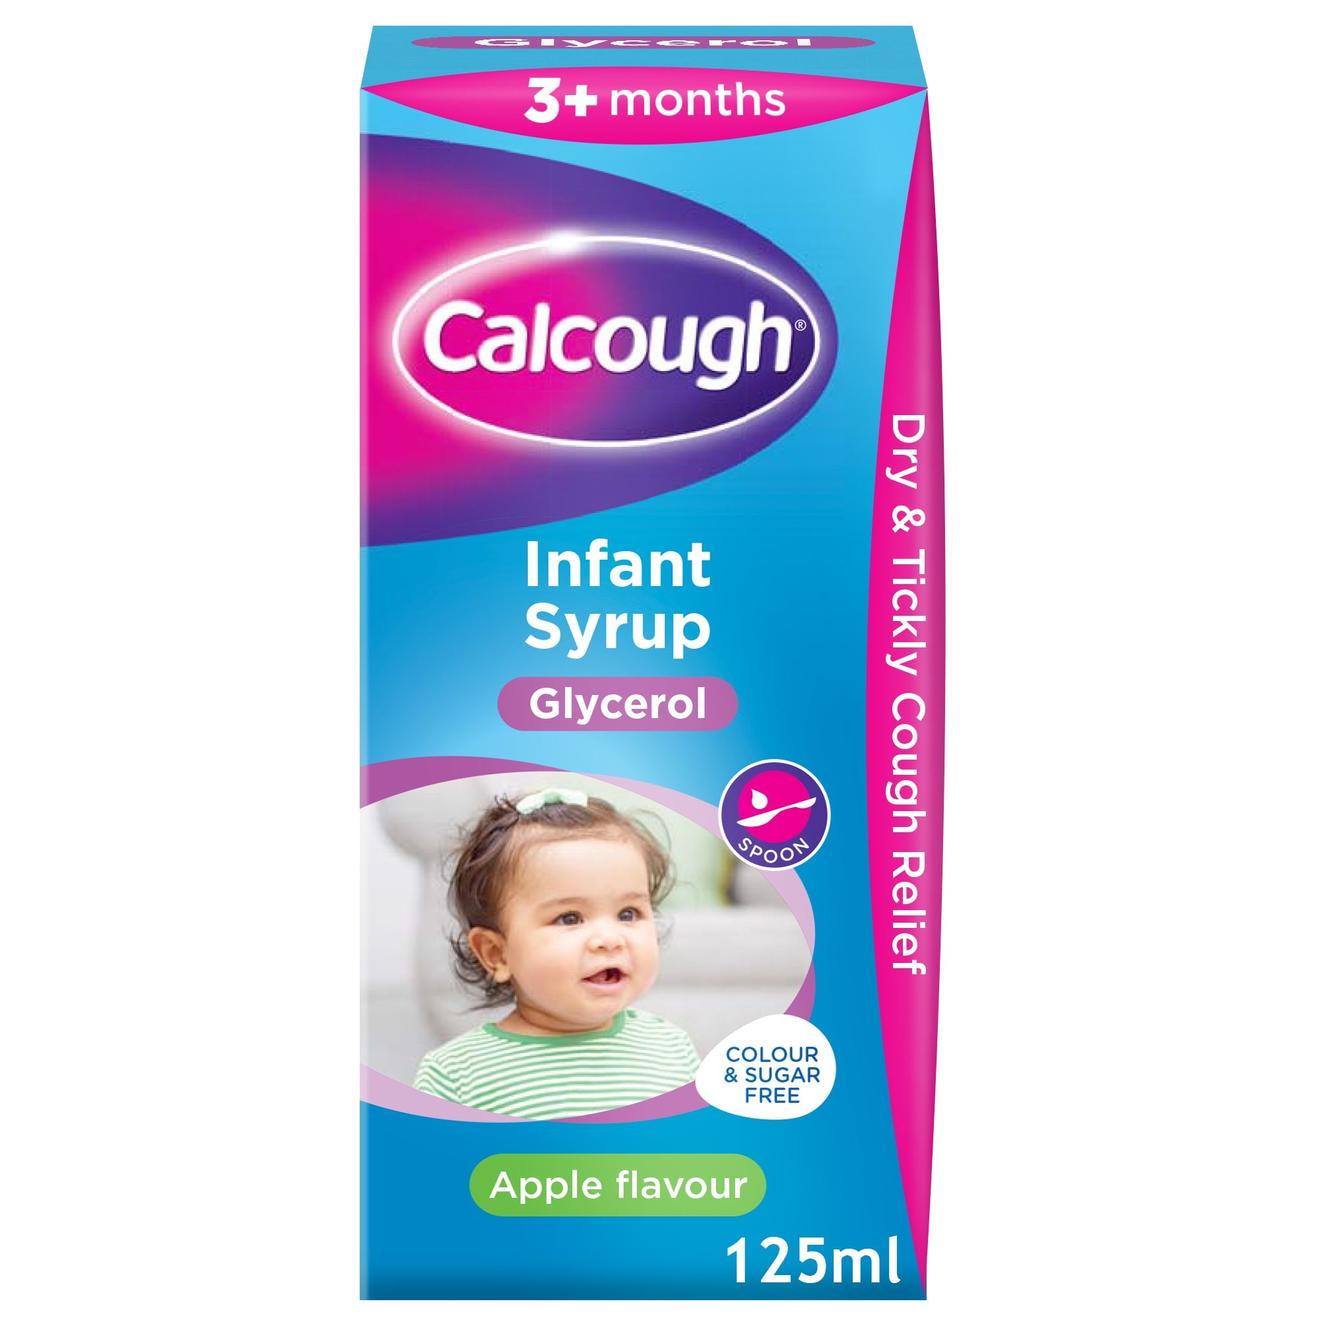 Calcough infant syrup apple flavour offers at £479 in Lloyds Pharmacy